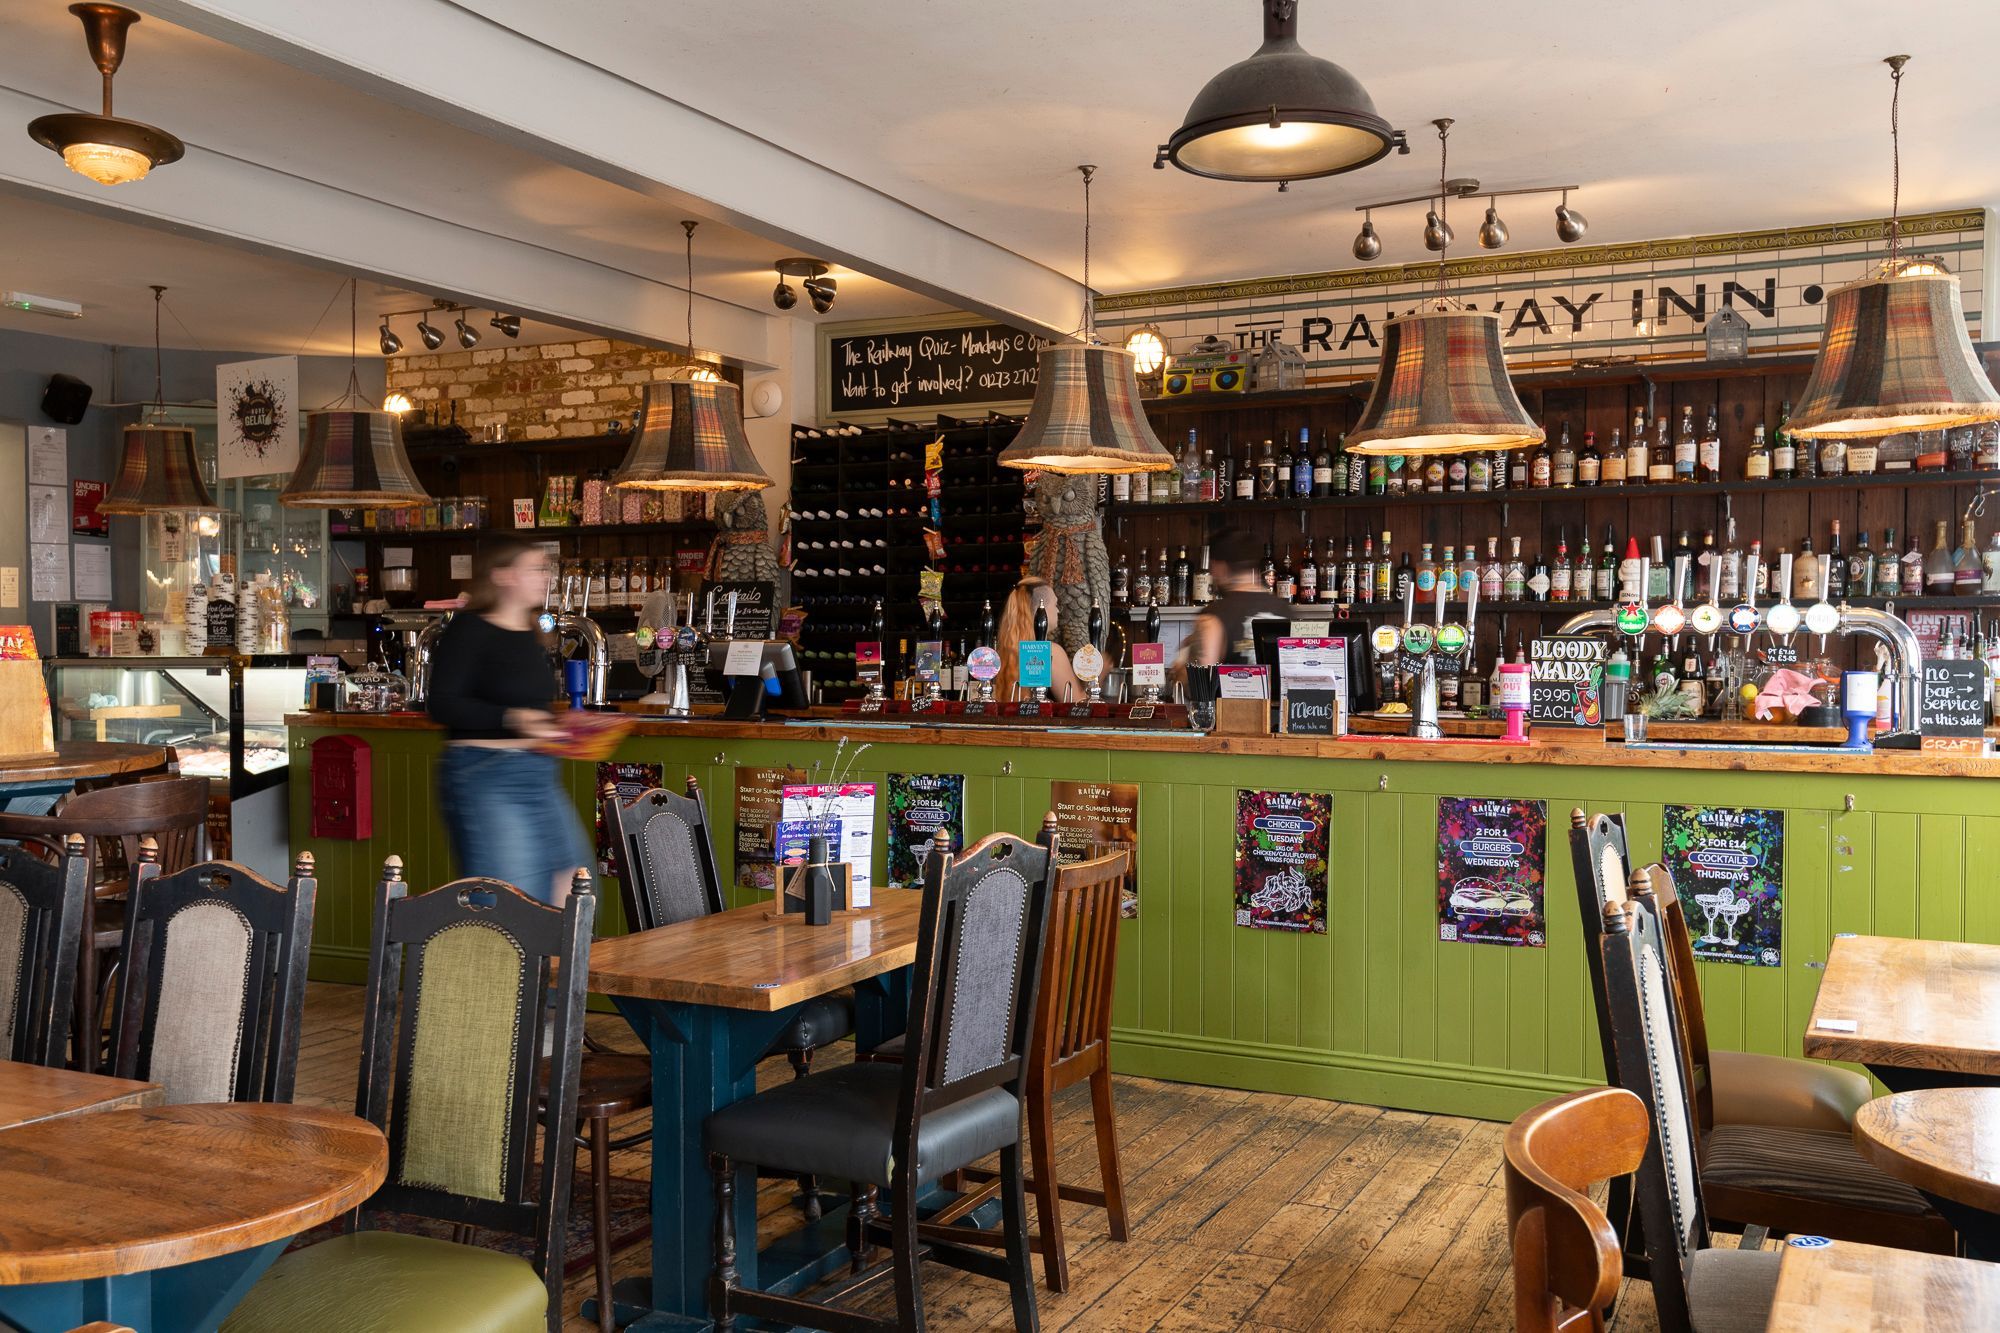 interior shot of The Railway Inn pub. Wooden chairs and tables, green bar area, lots of drinks